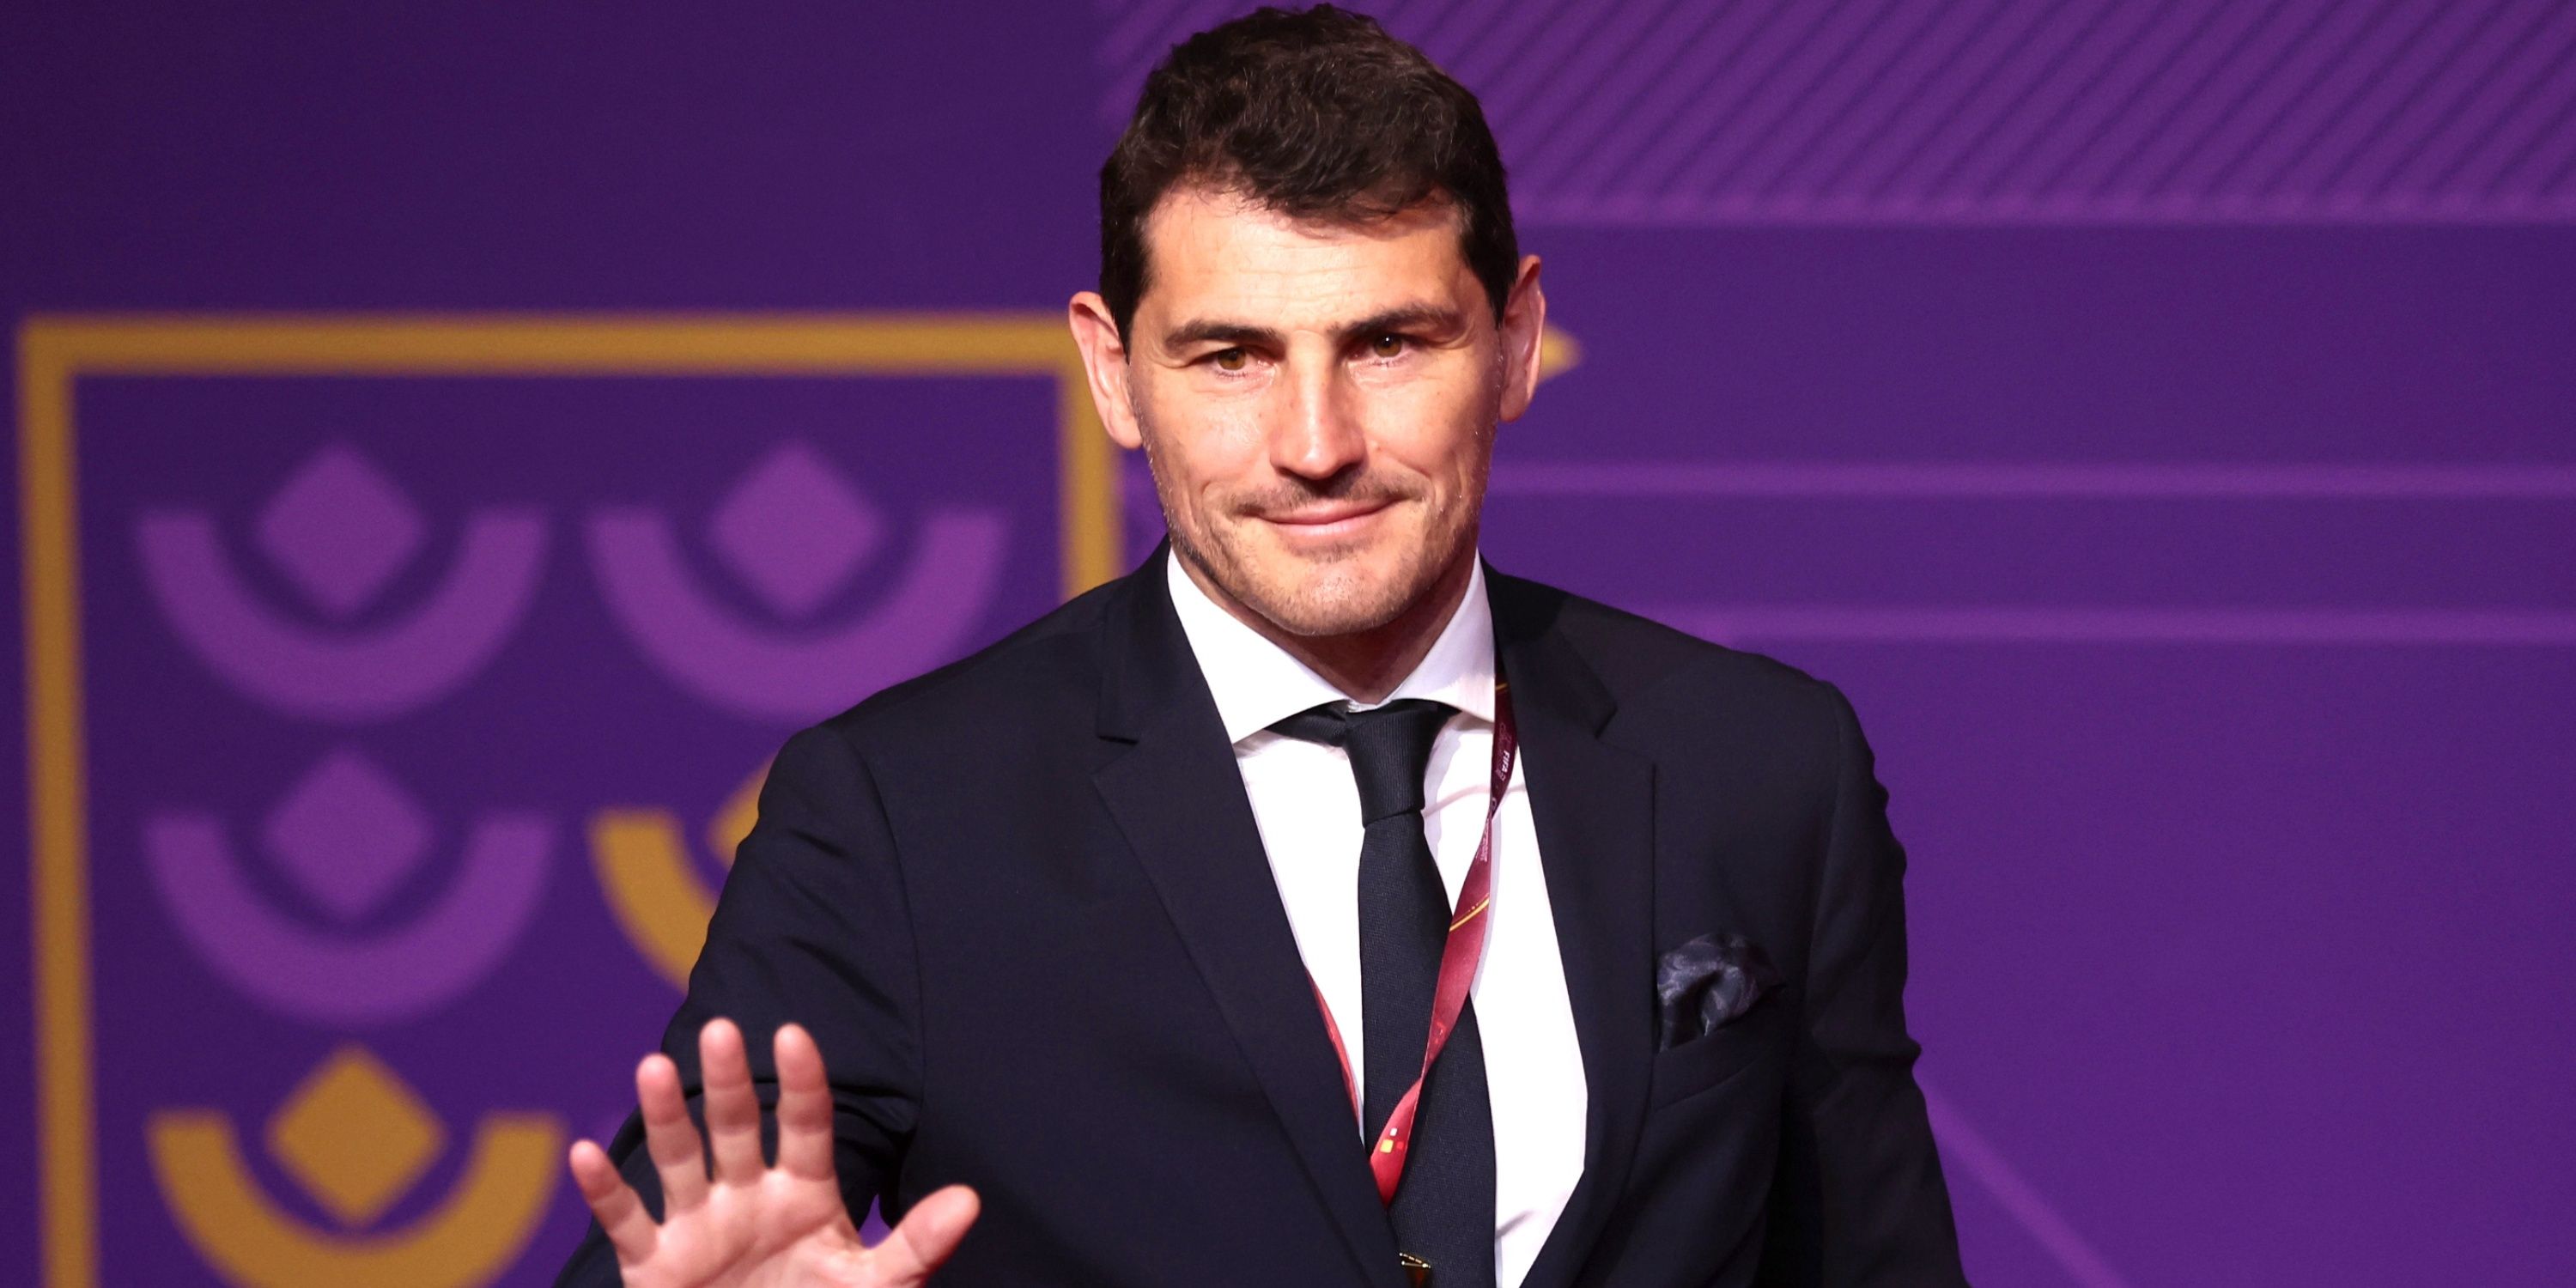 Iker Casillas causes stir with tweet after Lionel Messi wins FIFA’s The Best award